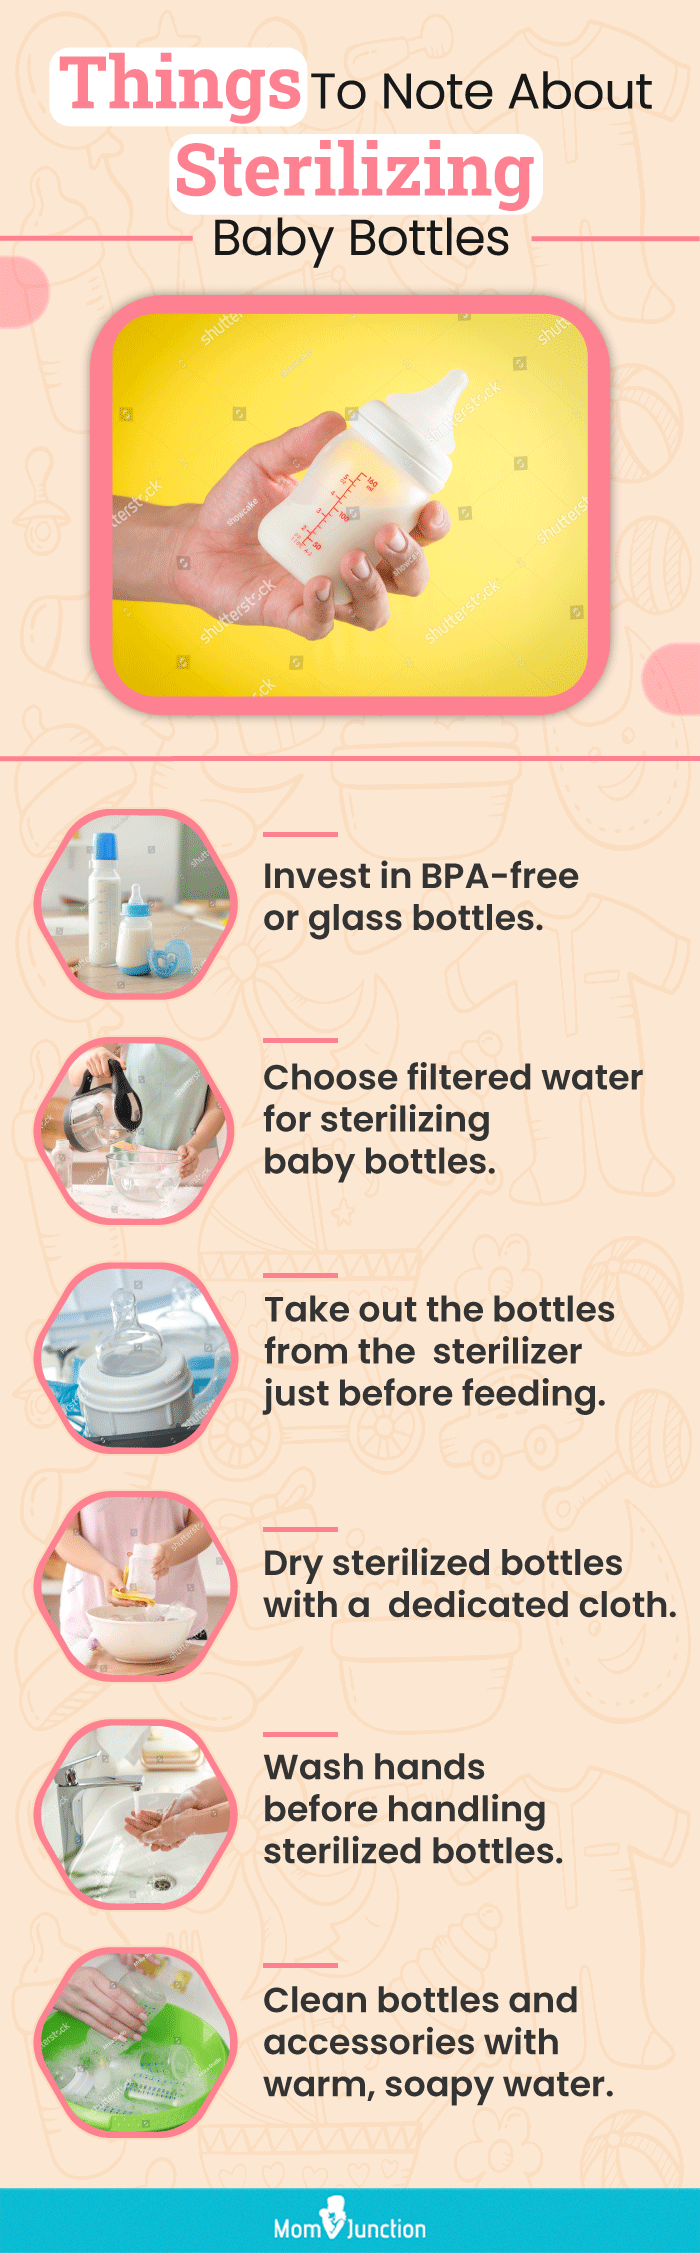 things to note about sterilizing baby bottles (infographic)